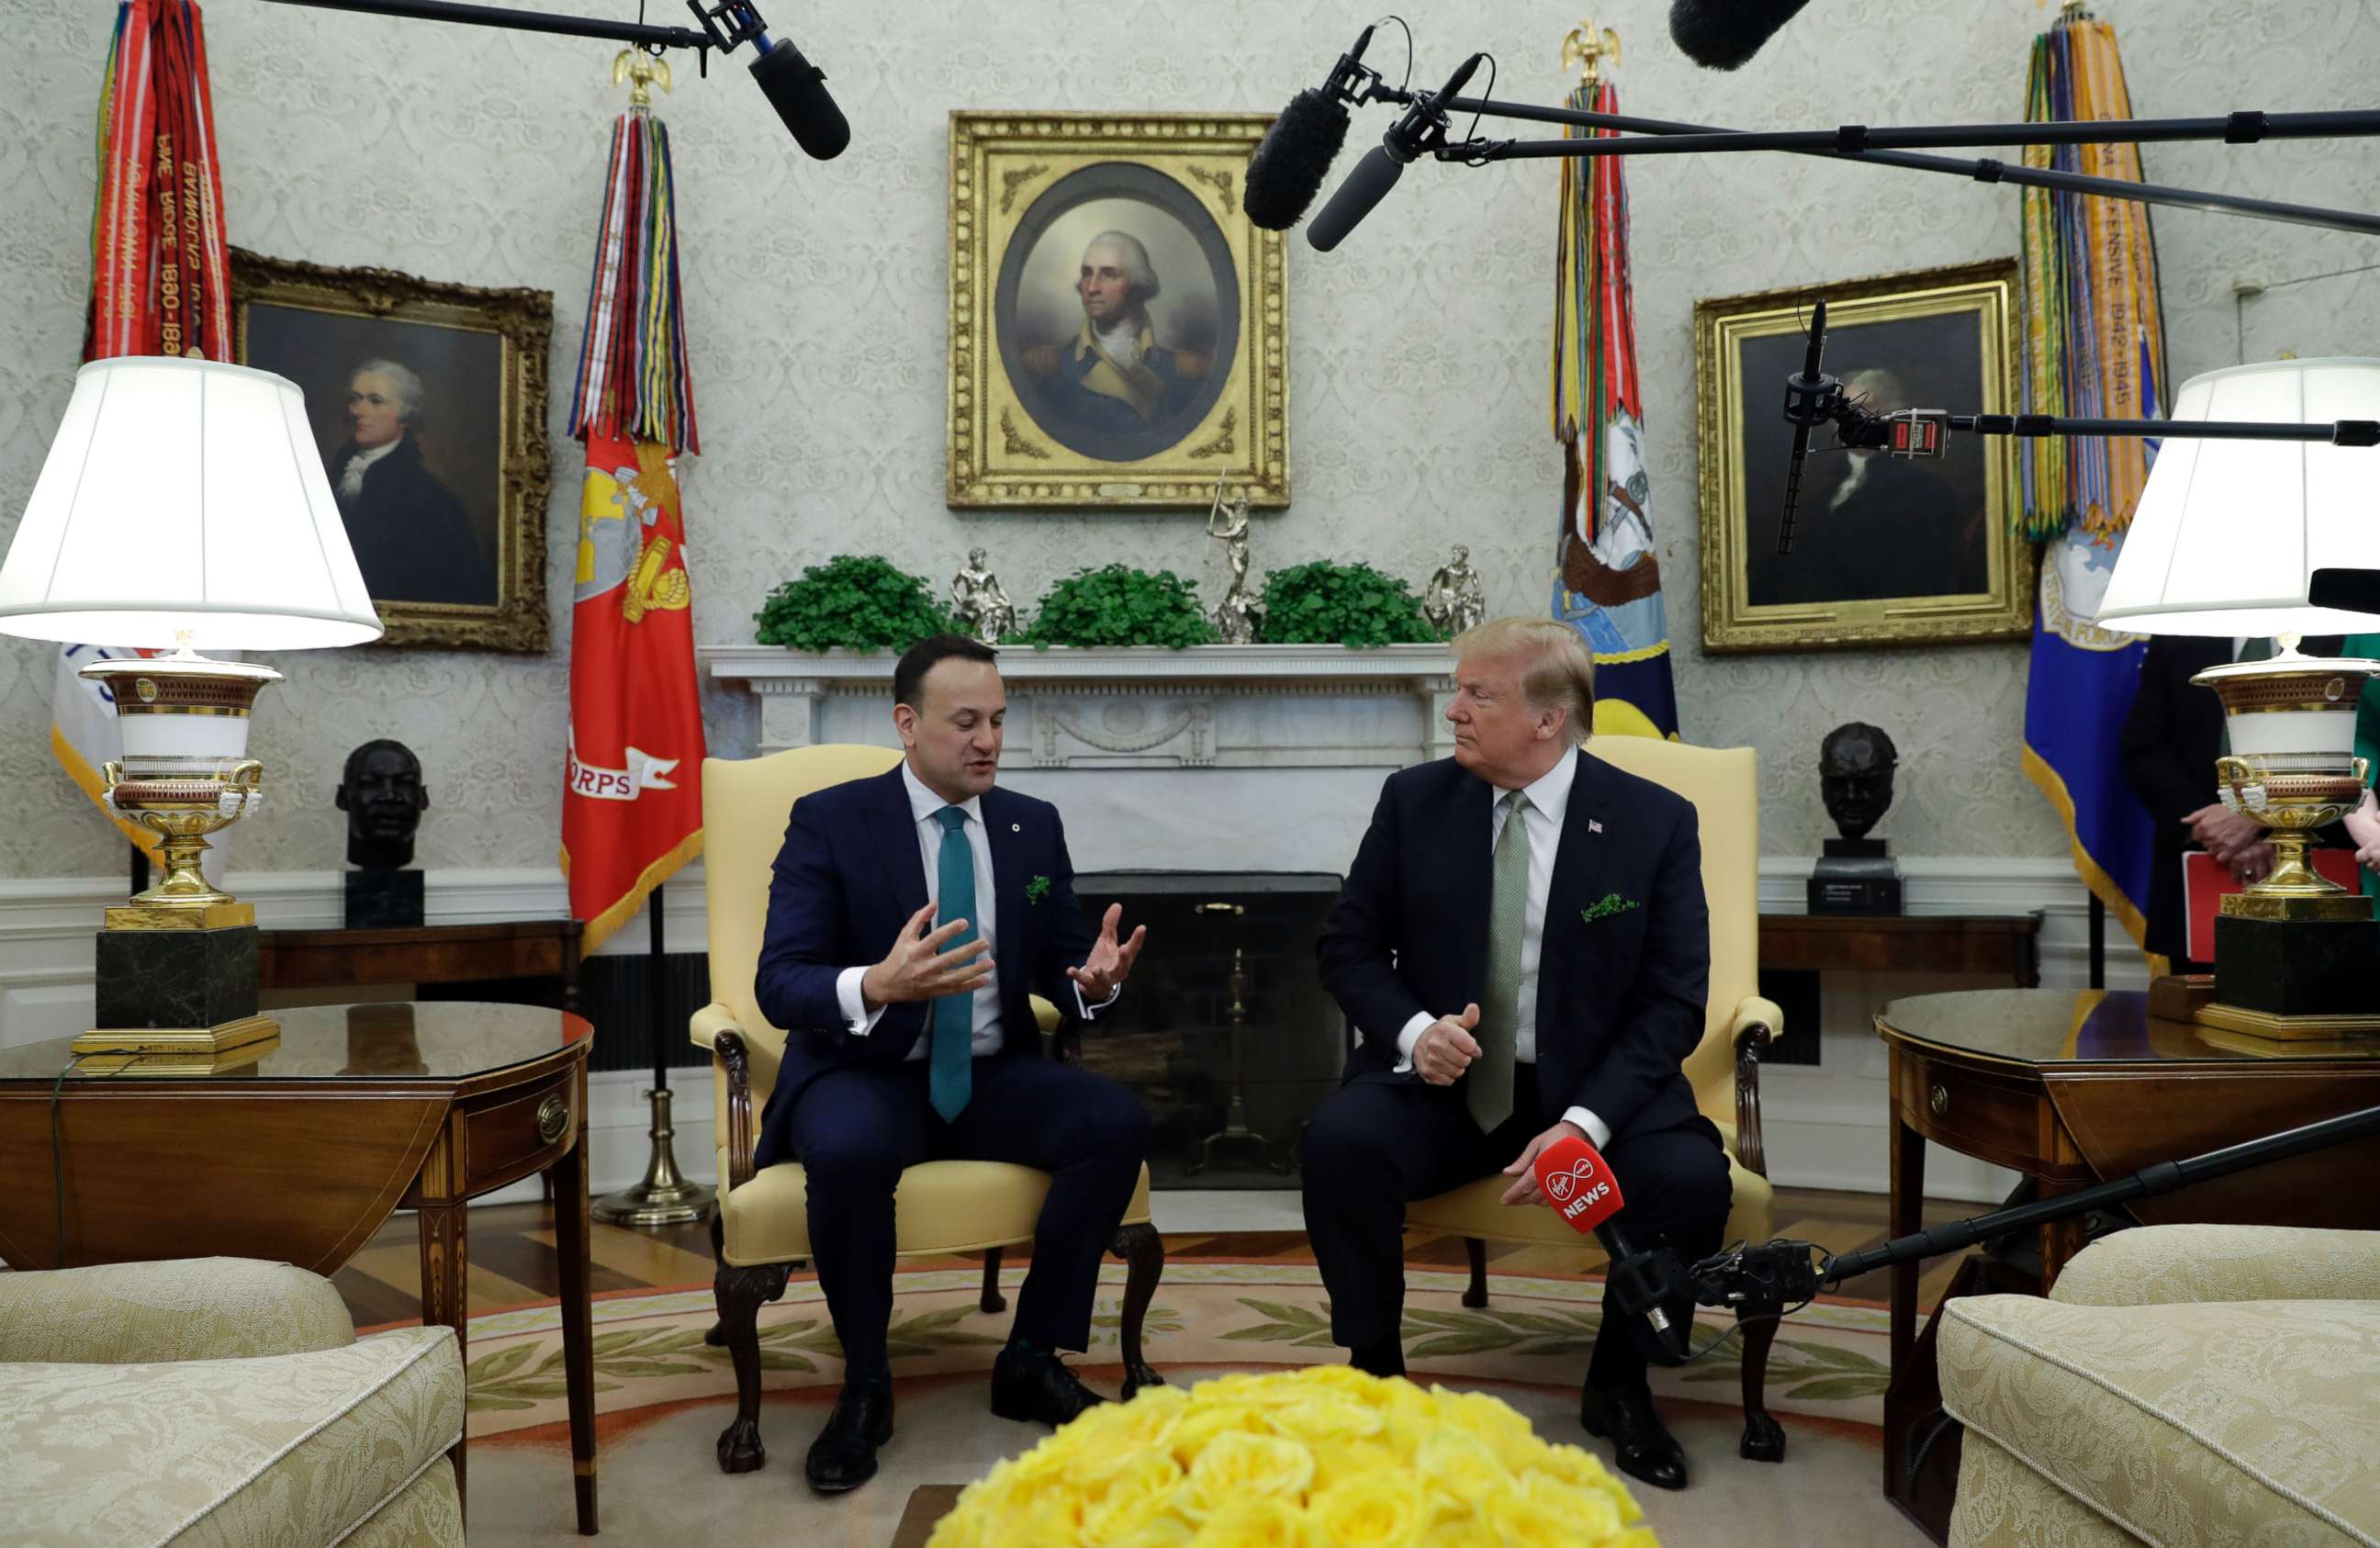 PHOTO: President Donald Trump meets with Irish Prime Minister Leo Varadkar in the Oval Office of the White House, March 14, 2019.